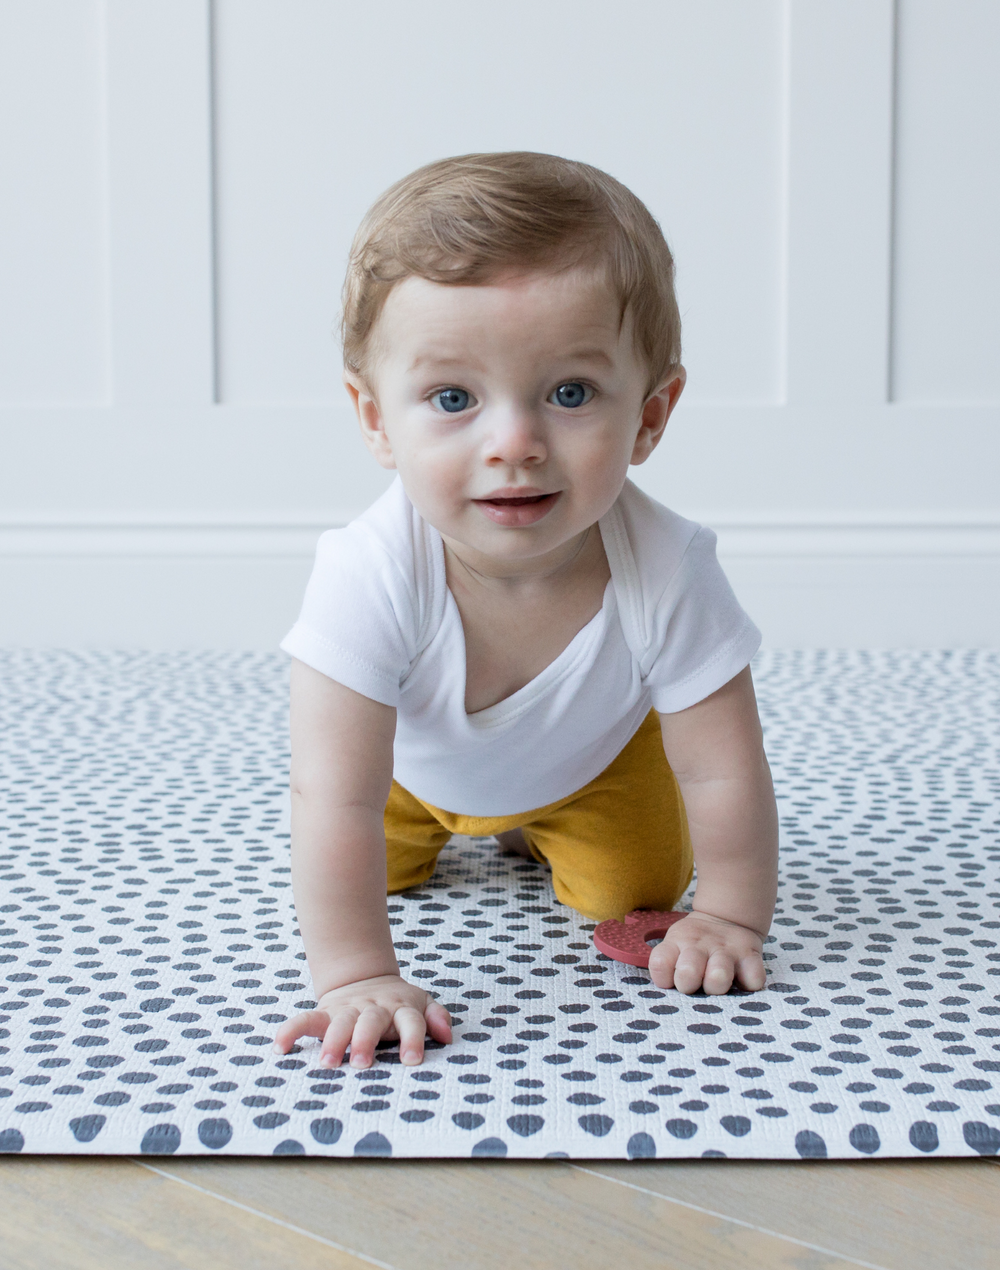 Little baby crawls across crawling mat with textured surface for traction while moving 